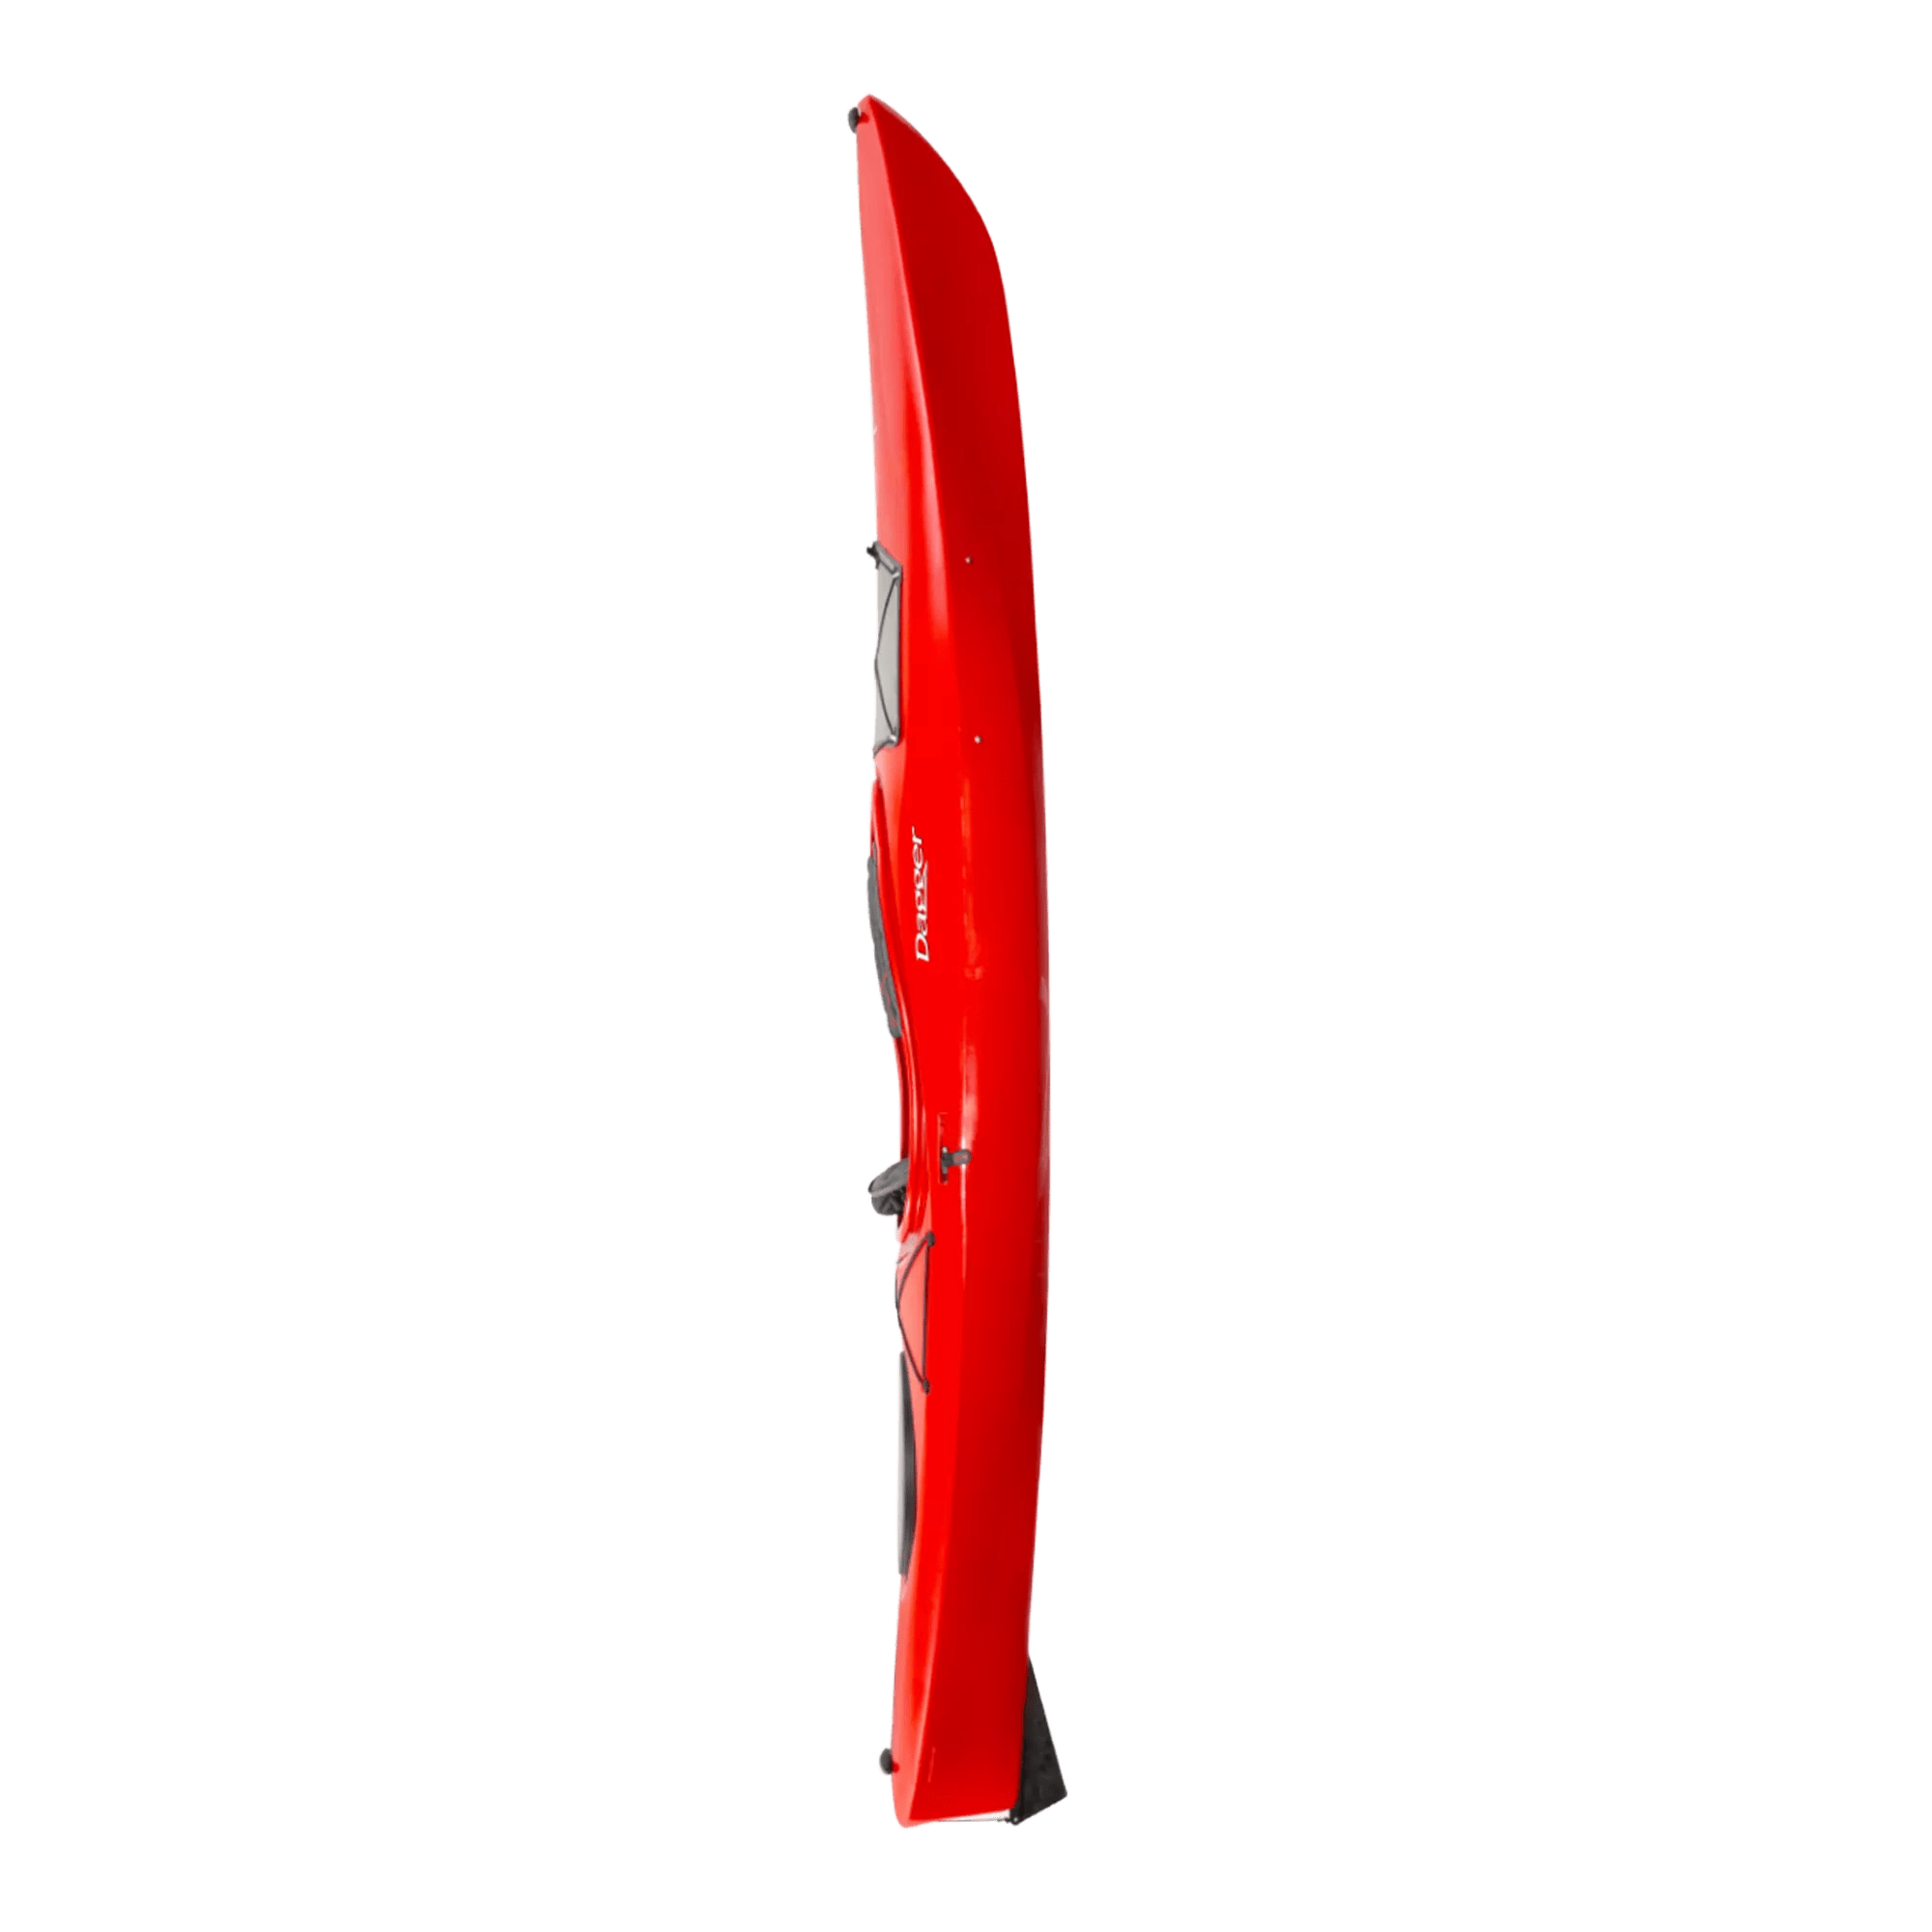 DAGGER - Axis 12.0 Crossover Kayak - Red - 9030525040 - SIDE